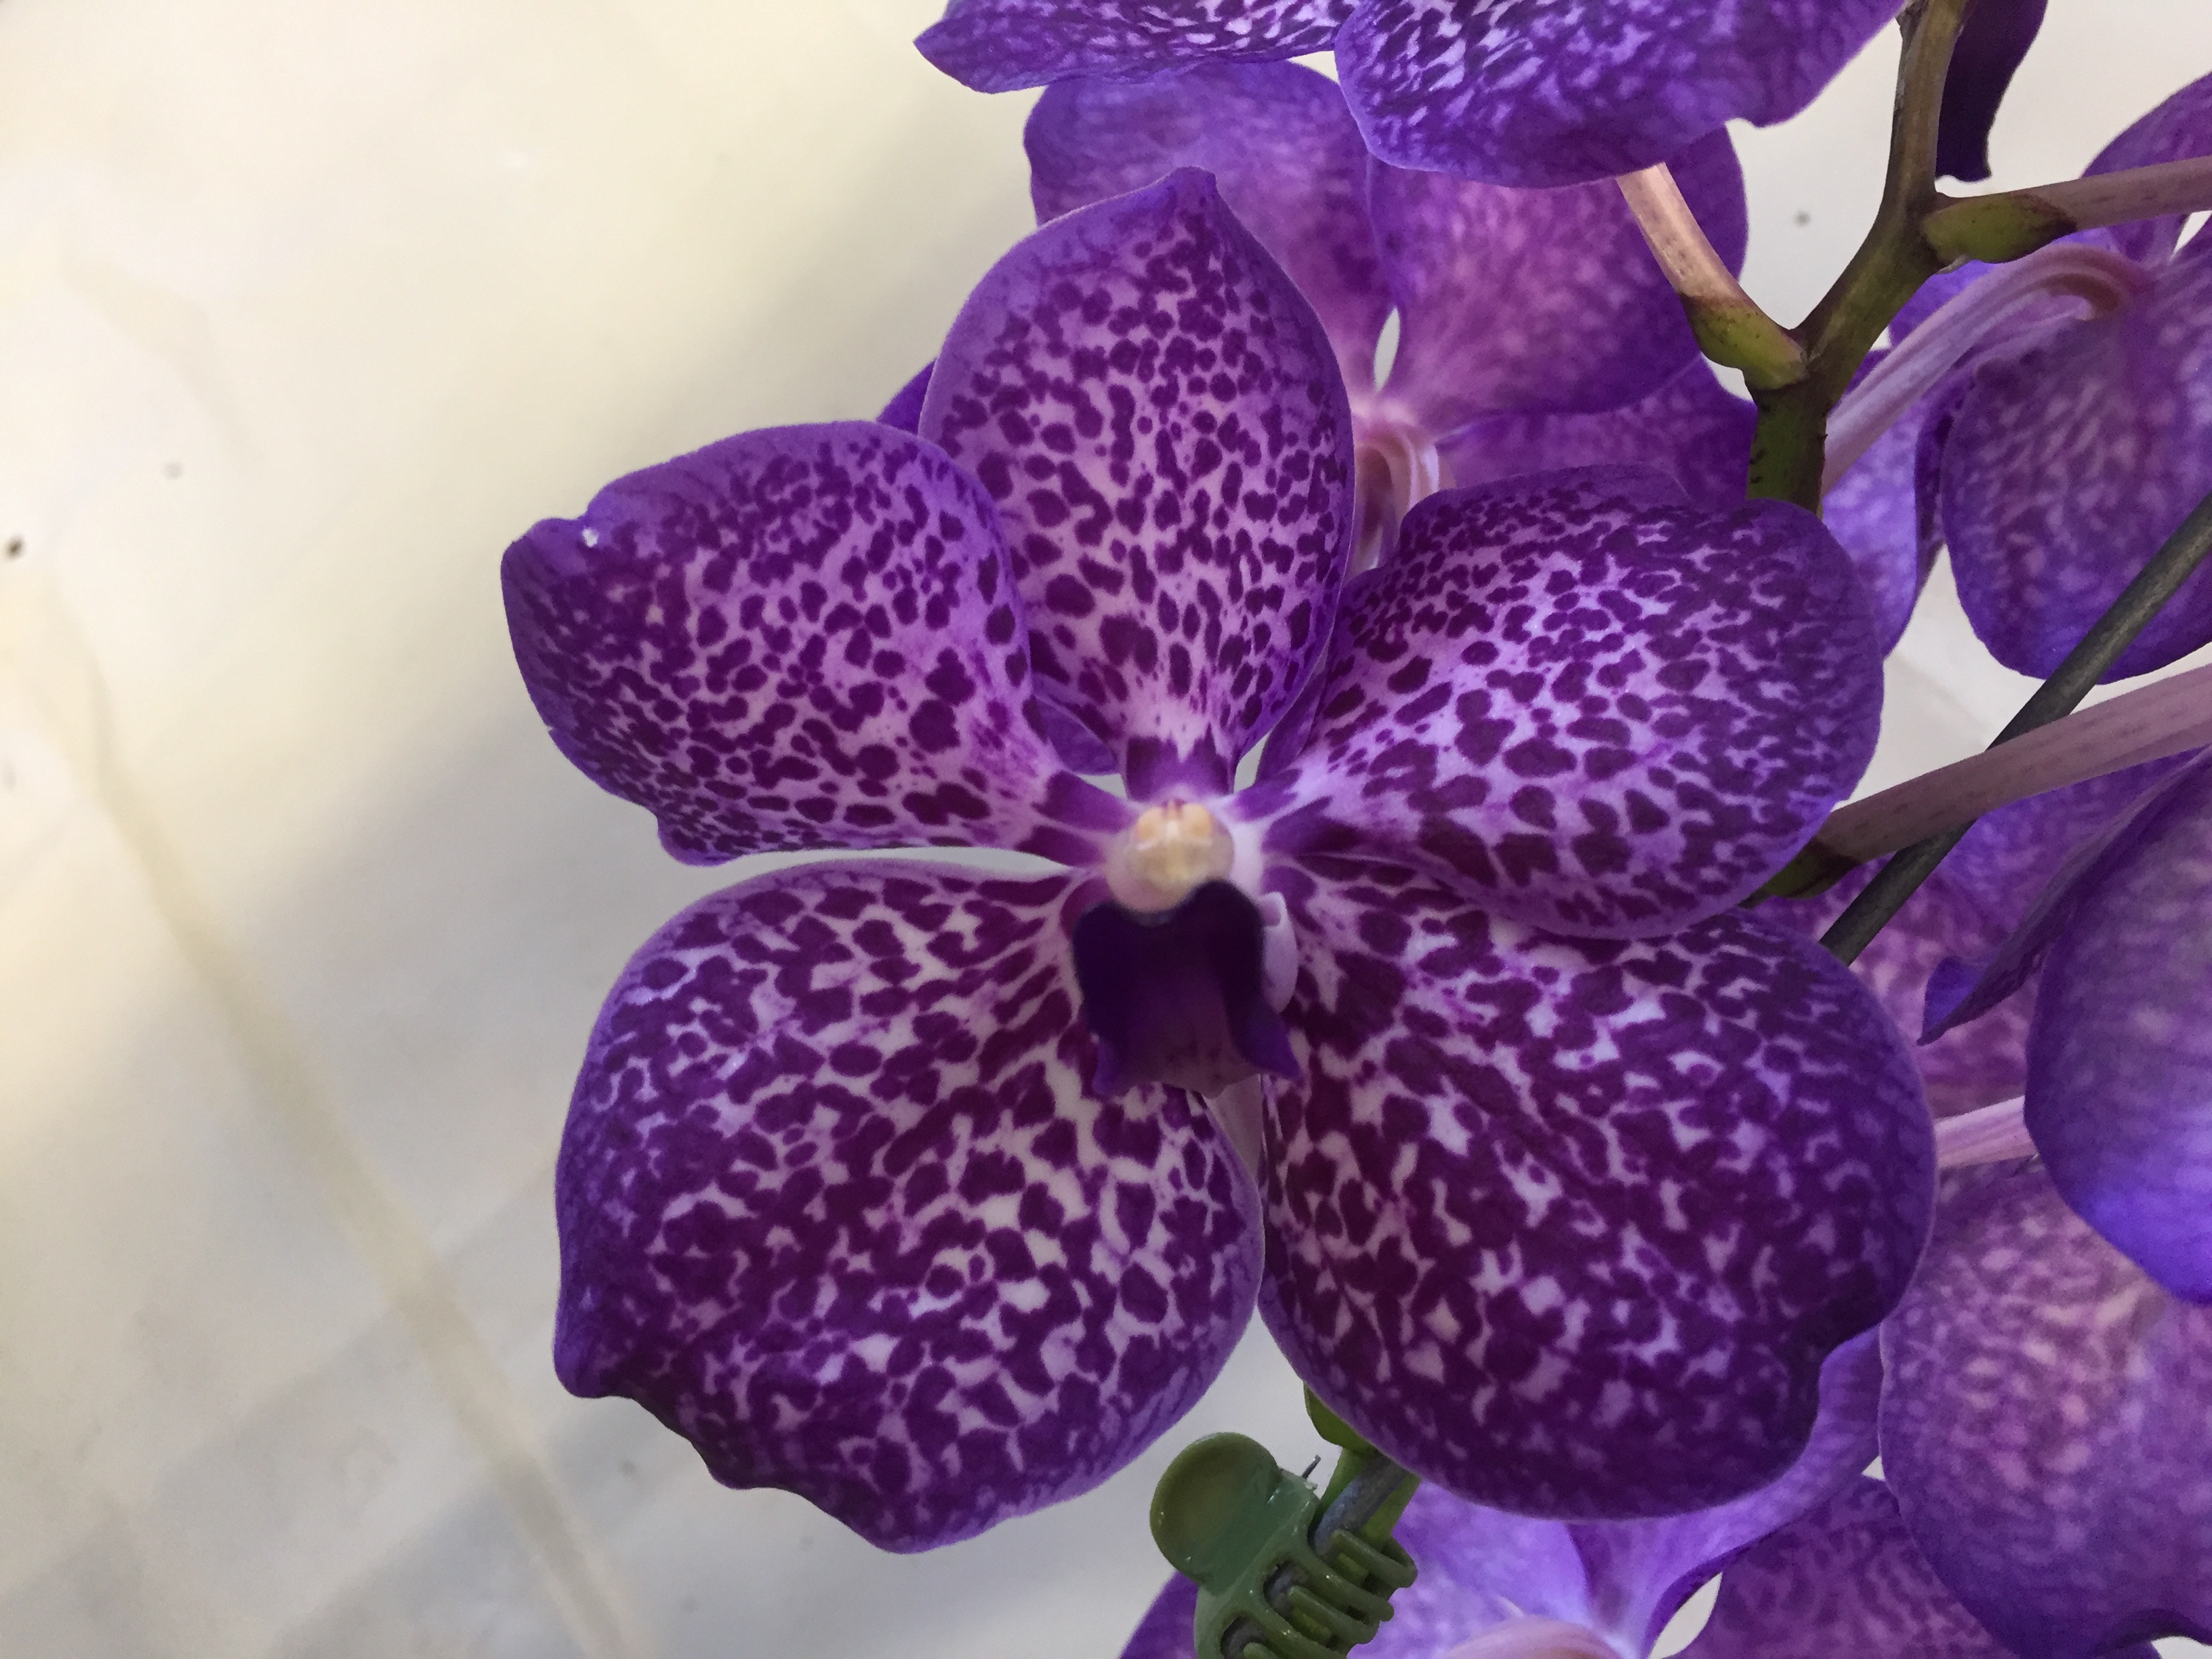 Ascocenda Elegant Blue | Orchideen-Wichmann.de - Highest horticultural  quality and experience since 1897